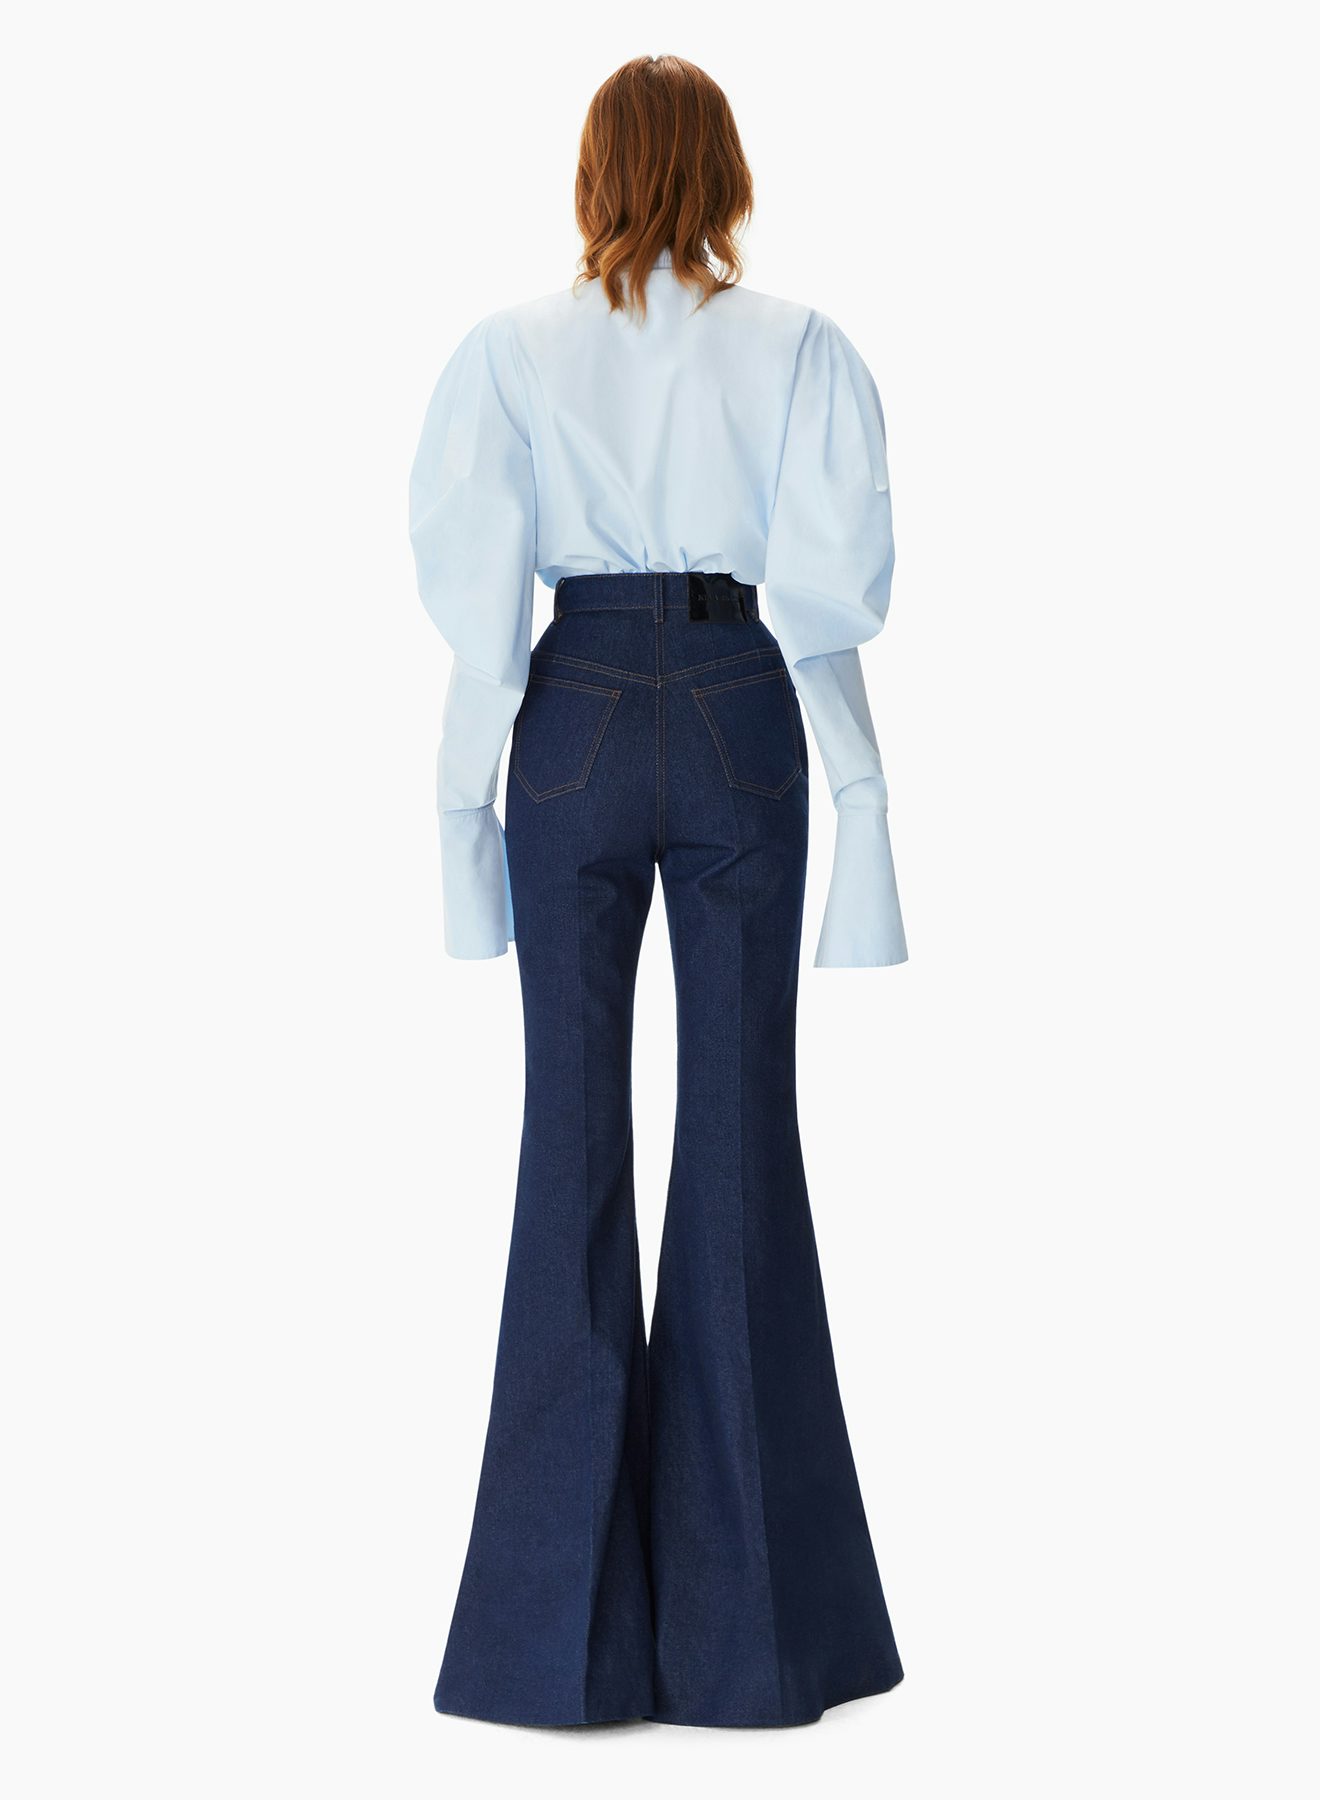 Poplin Shirt With Neck-Tie And Puff Gathered Sleeves Light Blue - Nina Ricci